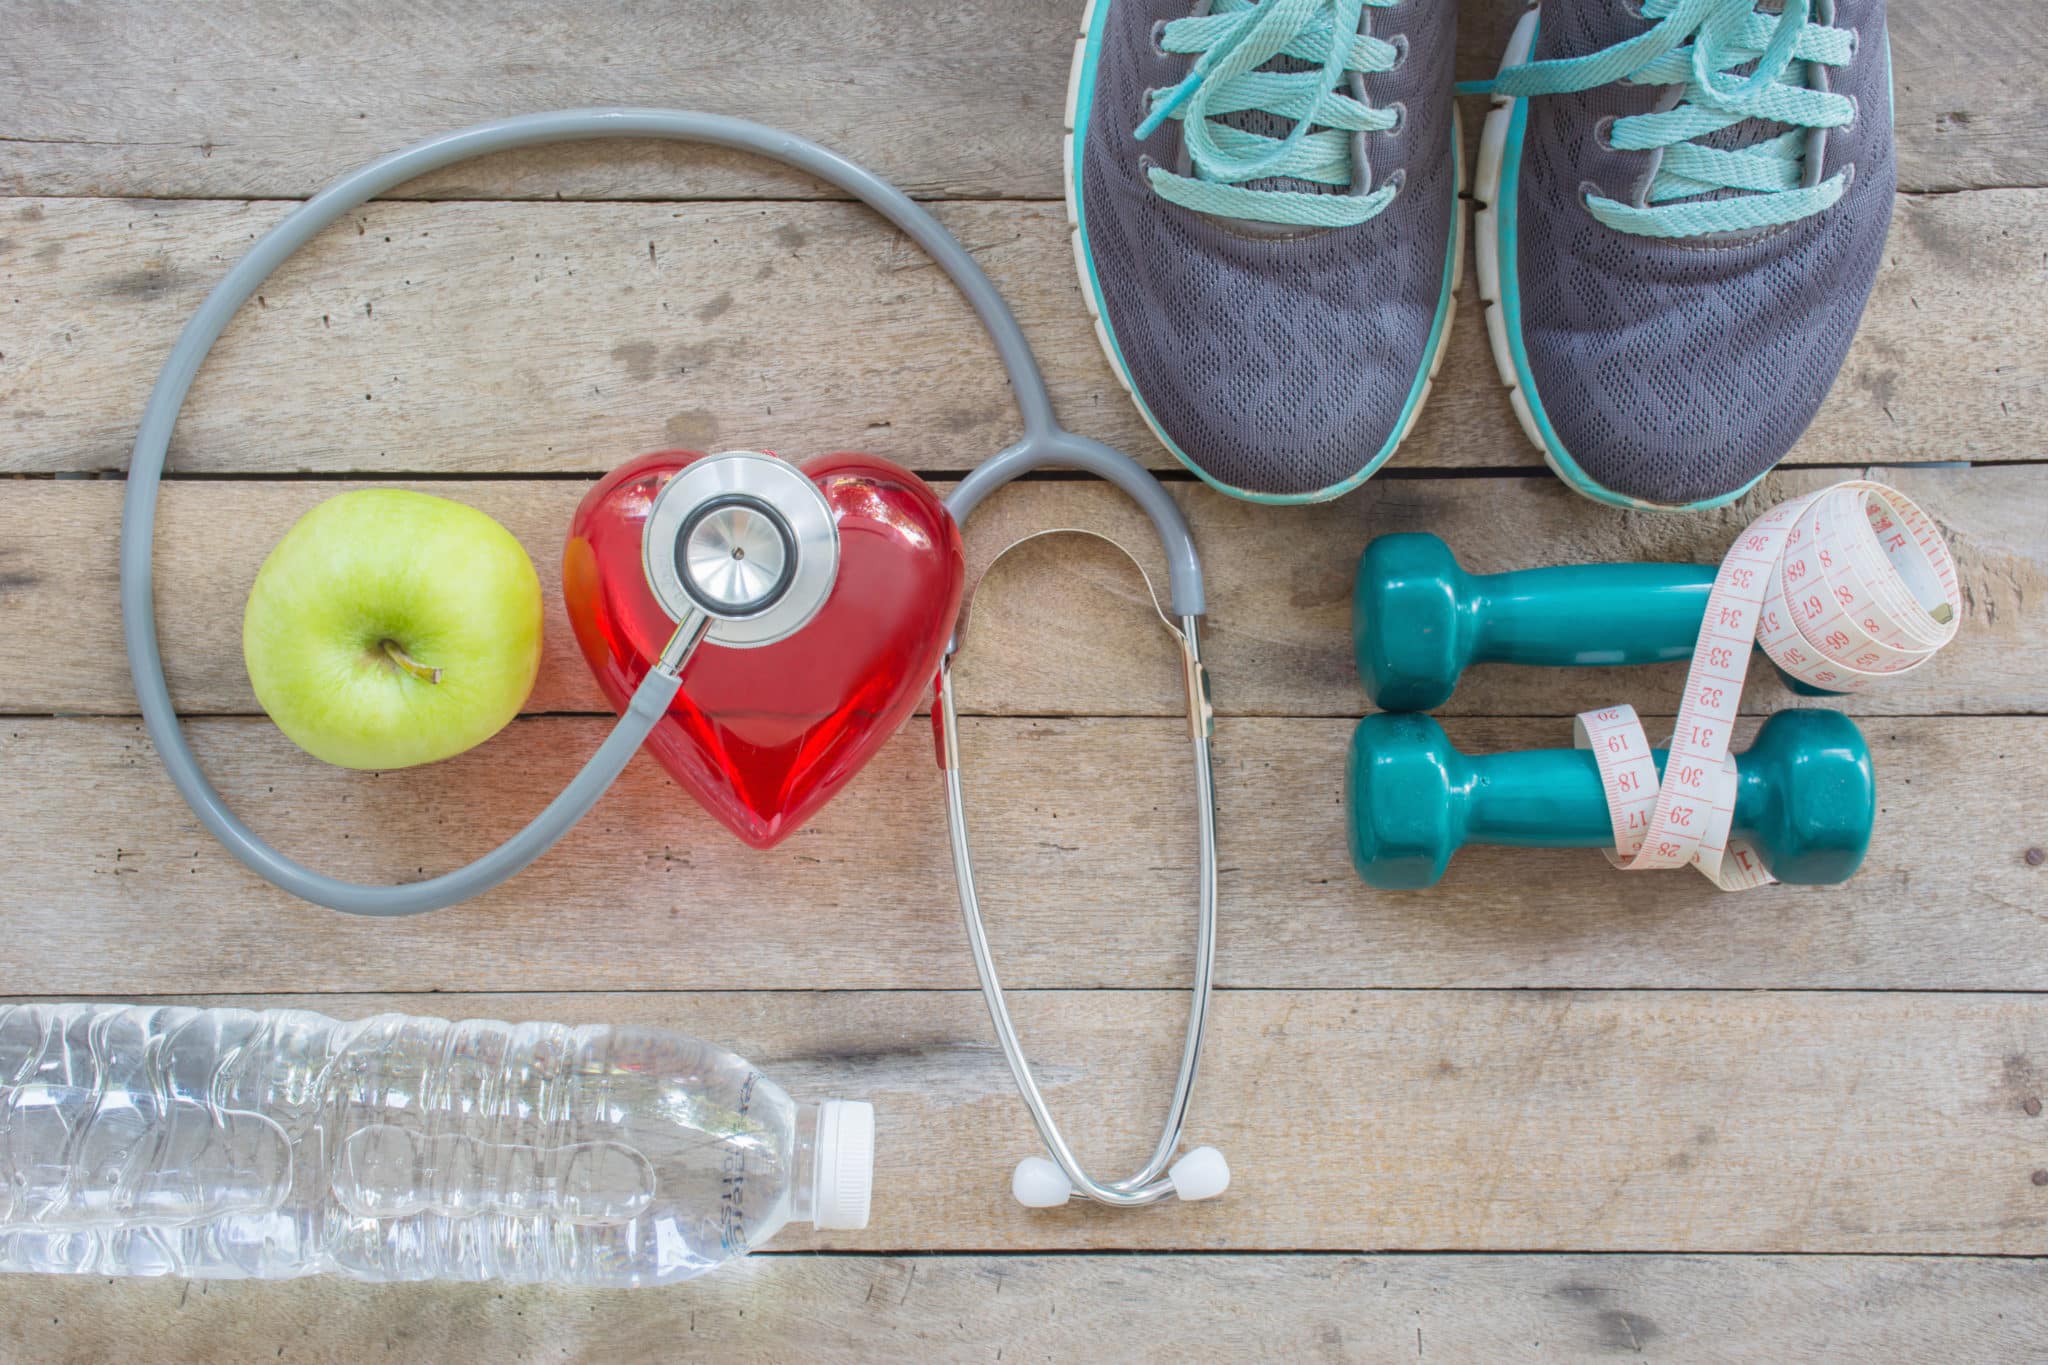 Tennis shoes, dumbbells, water bottle, apple and stethoscope all sitting together on wood planks